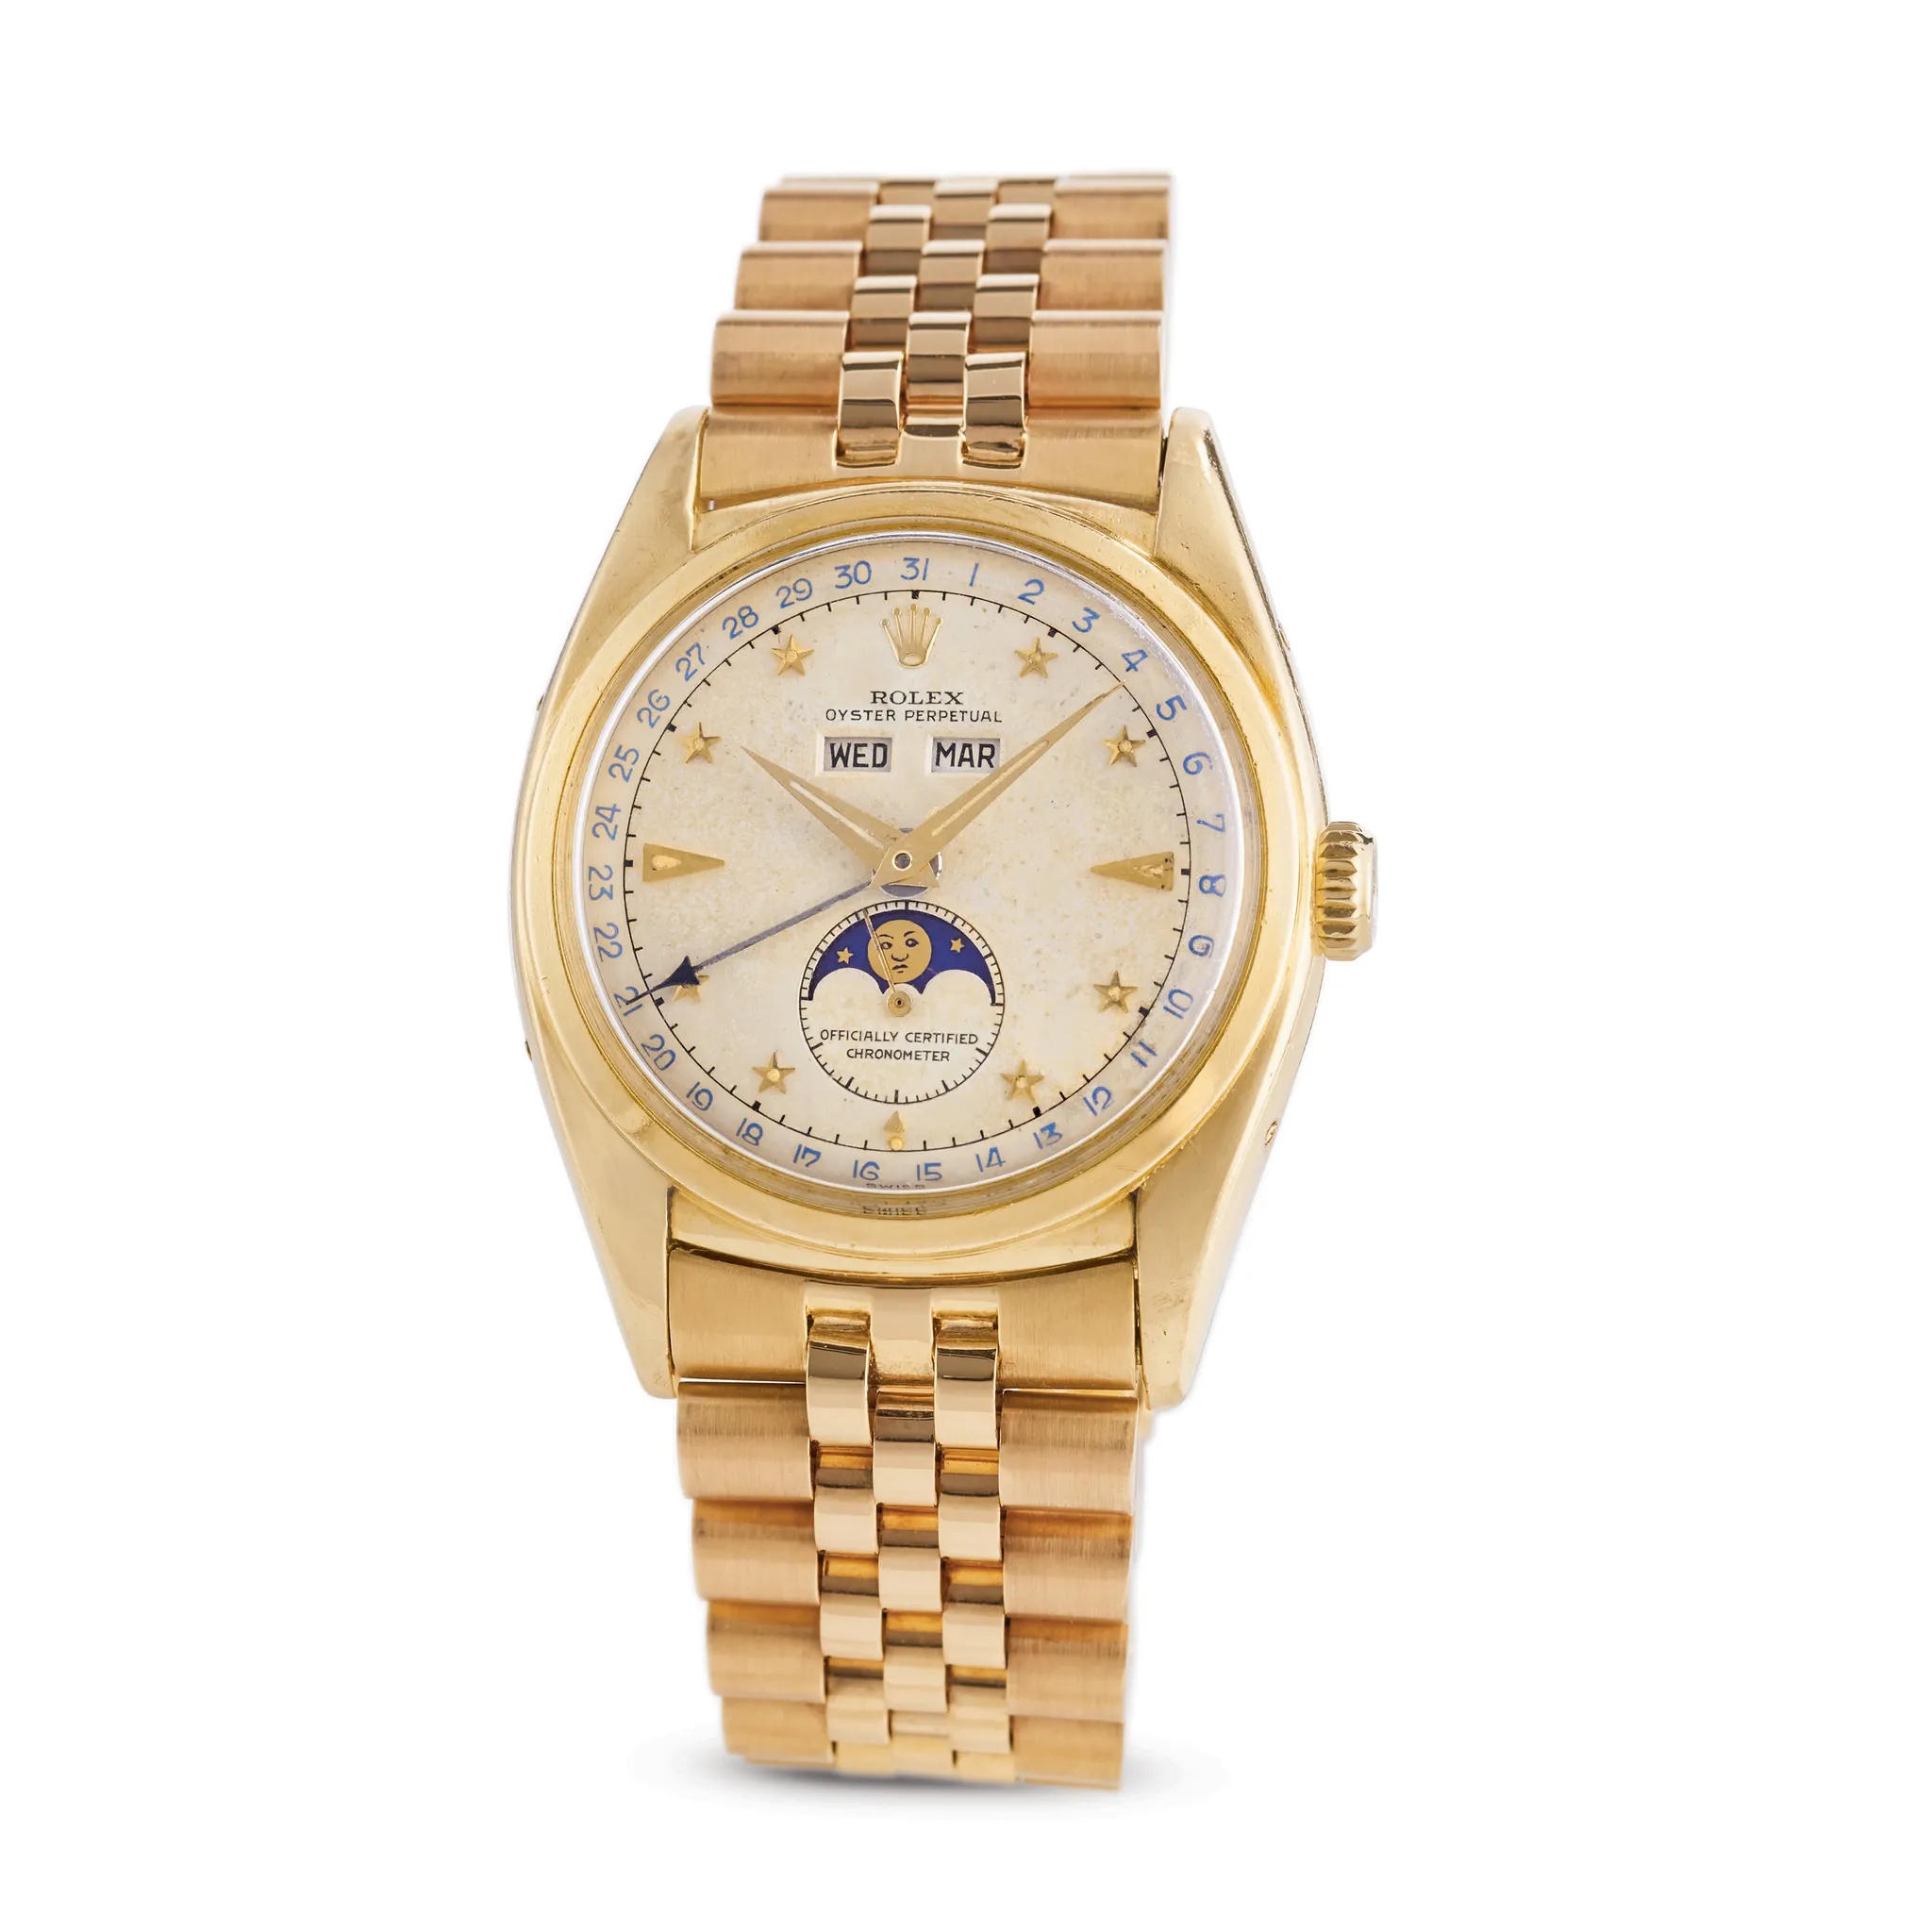 Rolex Oyster Perpetual "Stelline" 6062 36mm Yellow gold